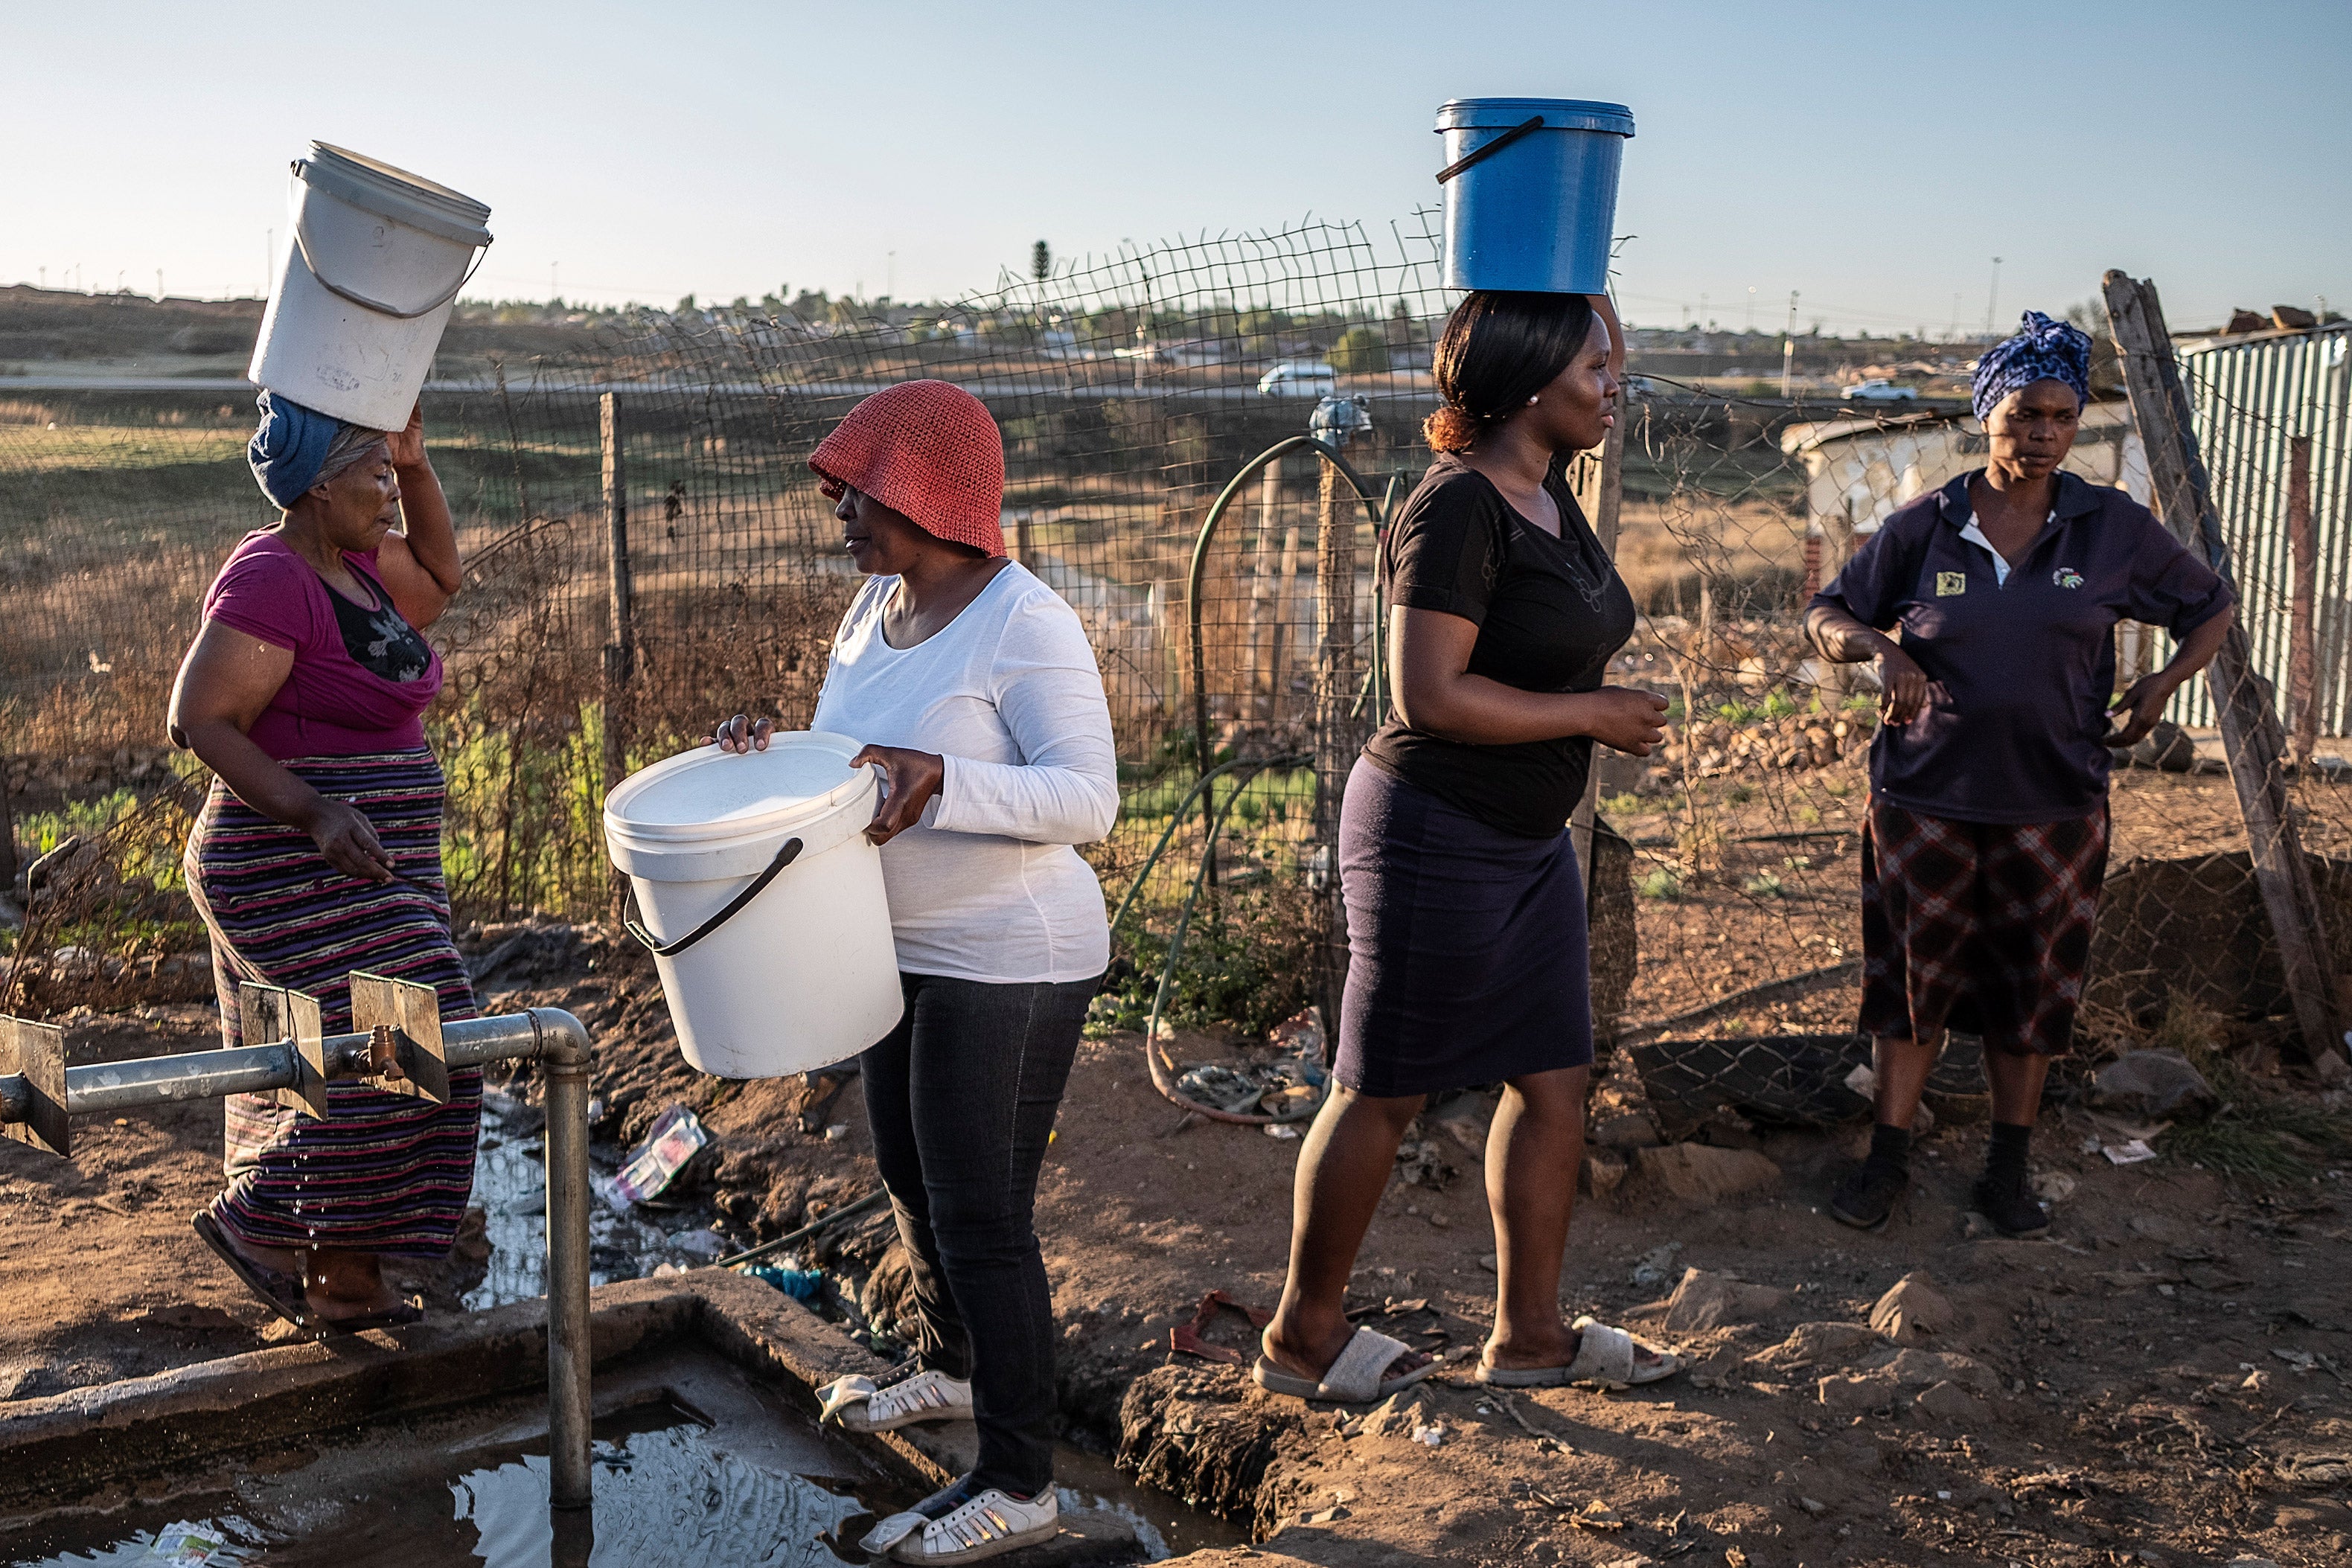 Women with buckets stand in line to get water from a tap.